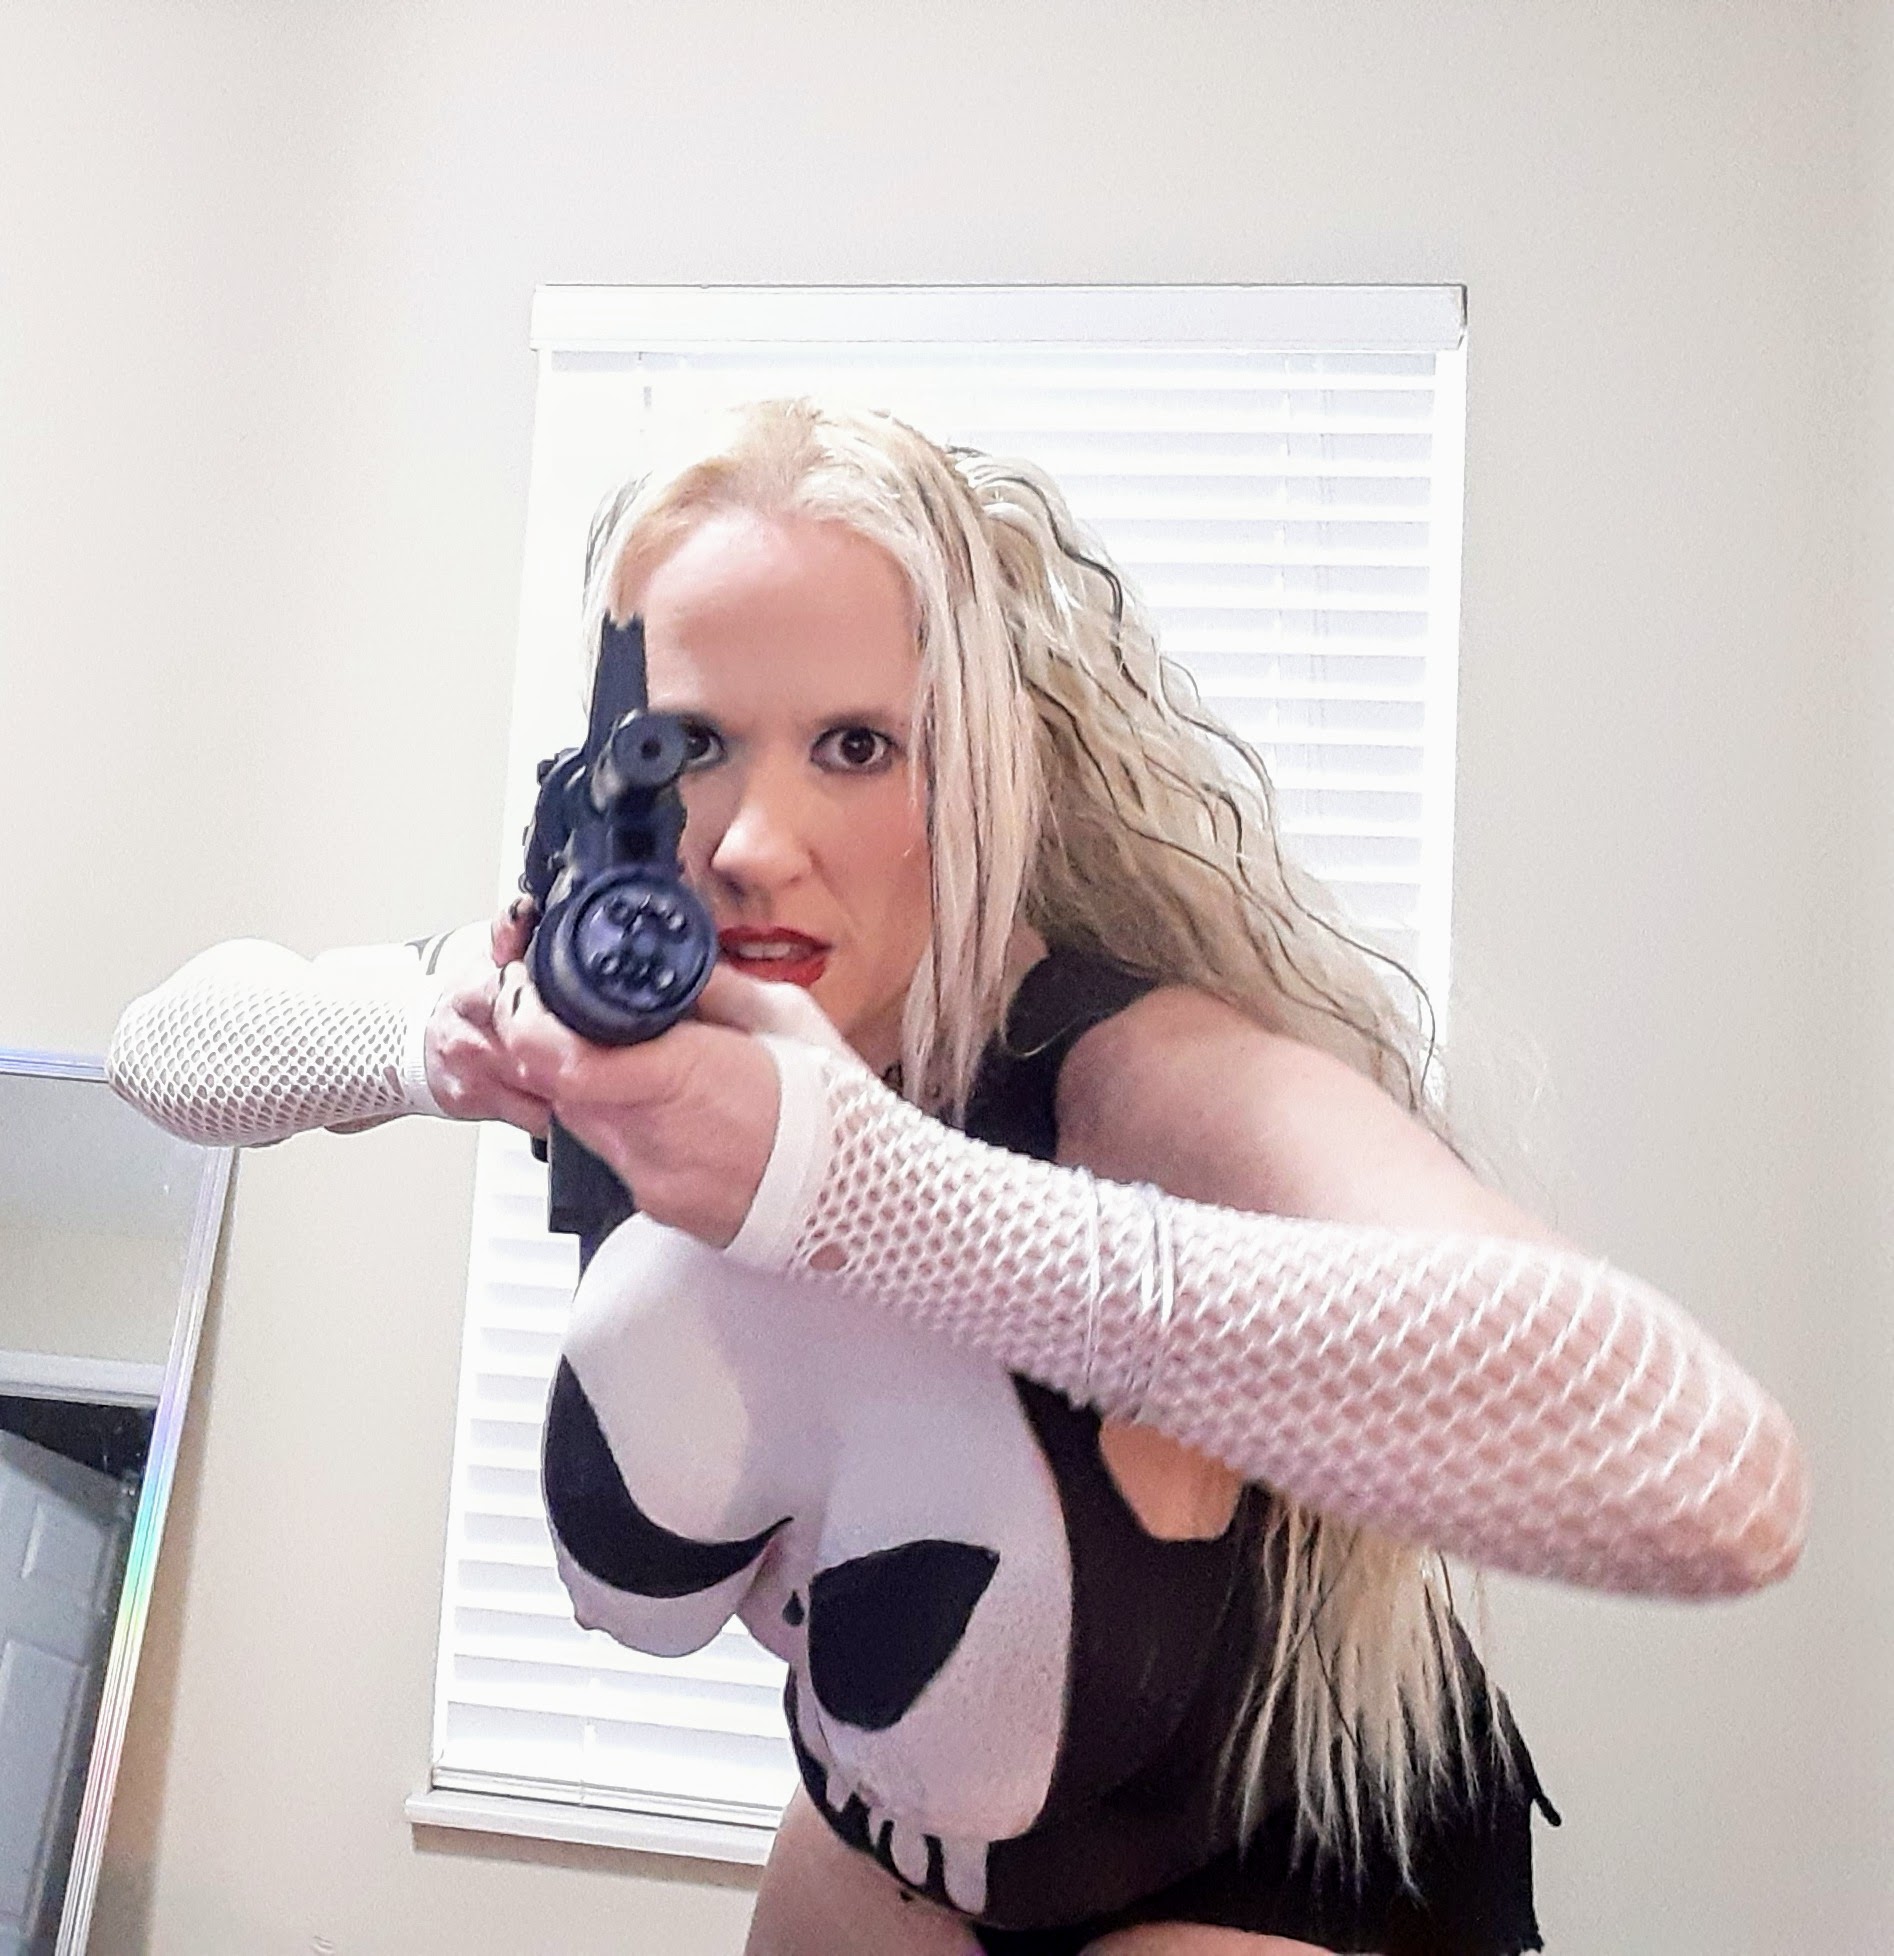 Punisher Bodypaint Cosplay - Daisy Chain Cosplay